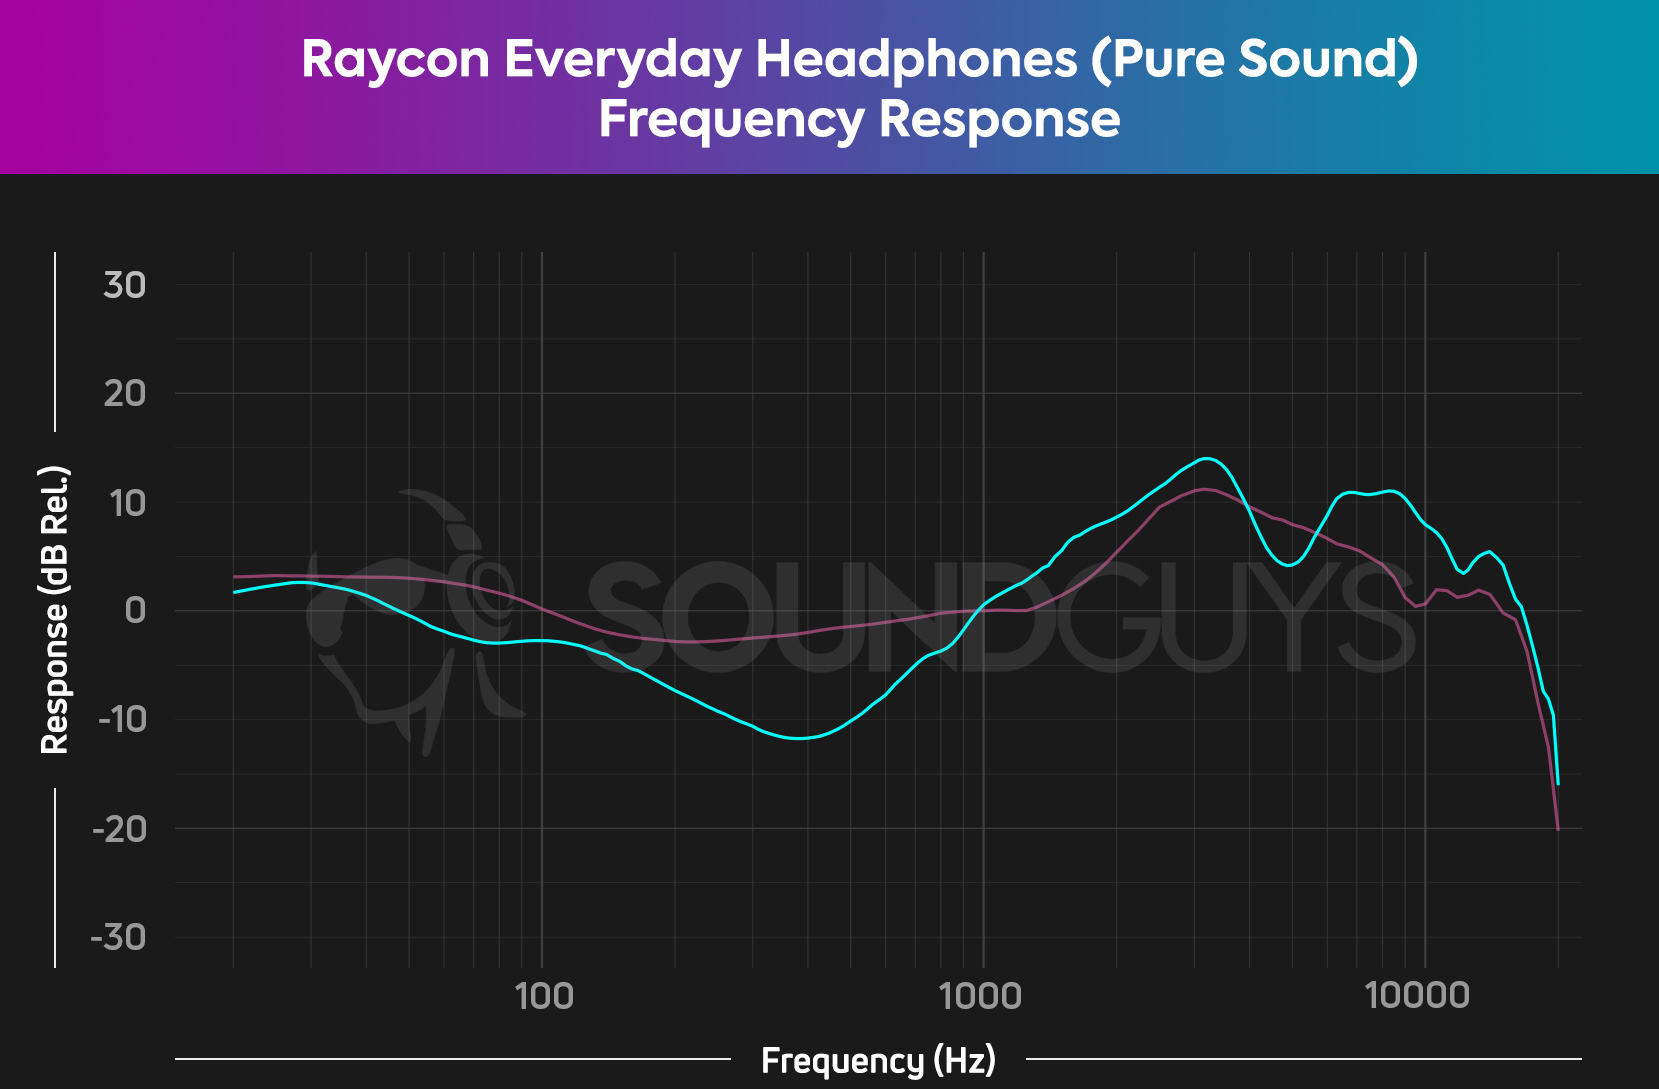 The frequency response chart for the Raycon Everyday Headphones (Pure Sound), which shows de-emphasized mids and emphasized treble notes.